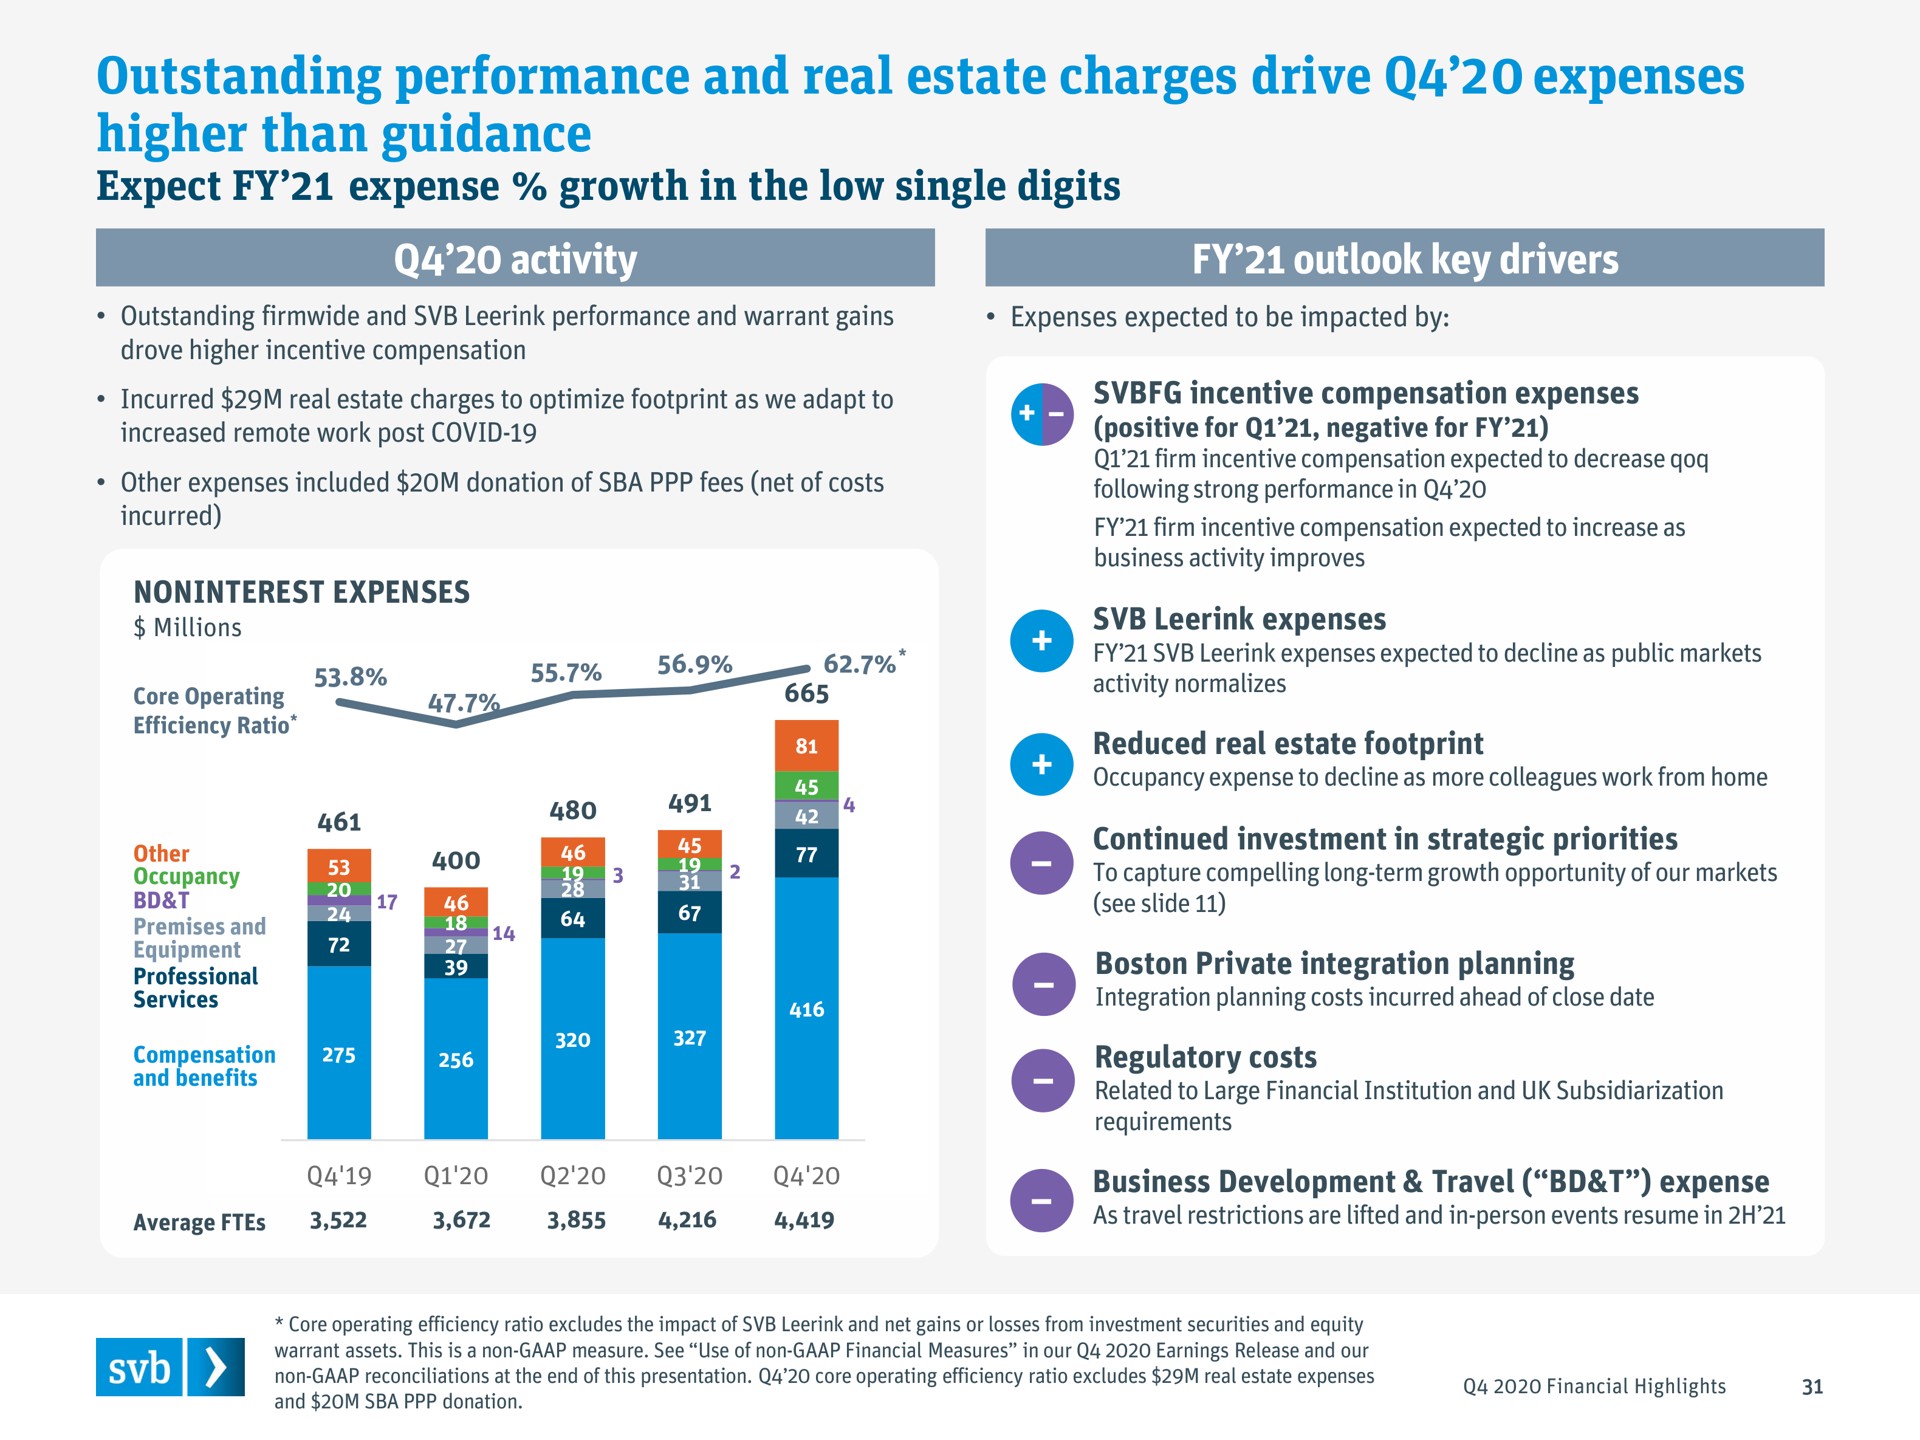 outstanding performance and real estate charges drive expenses higher than guidance | Silicon Valley Bank